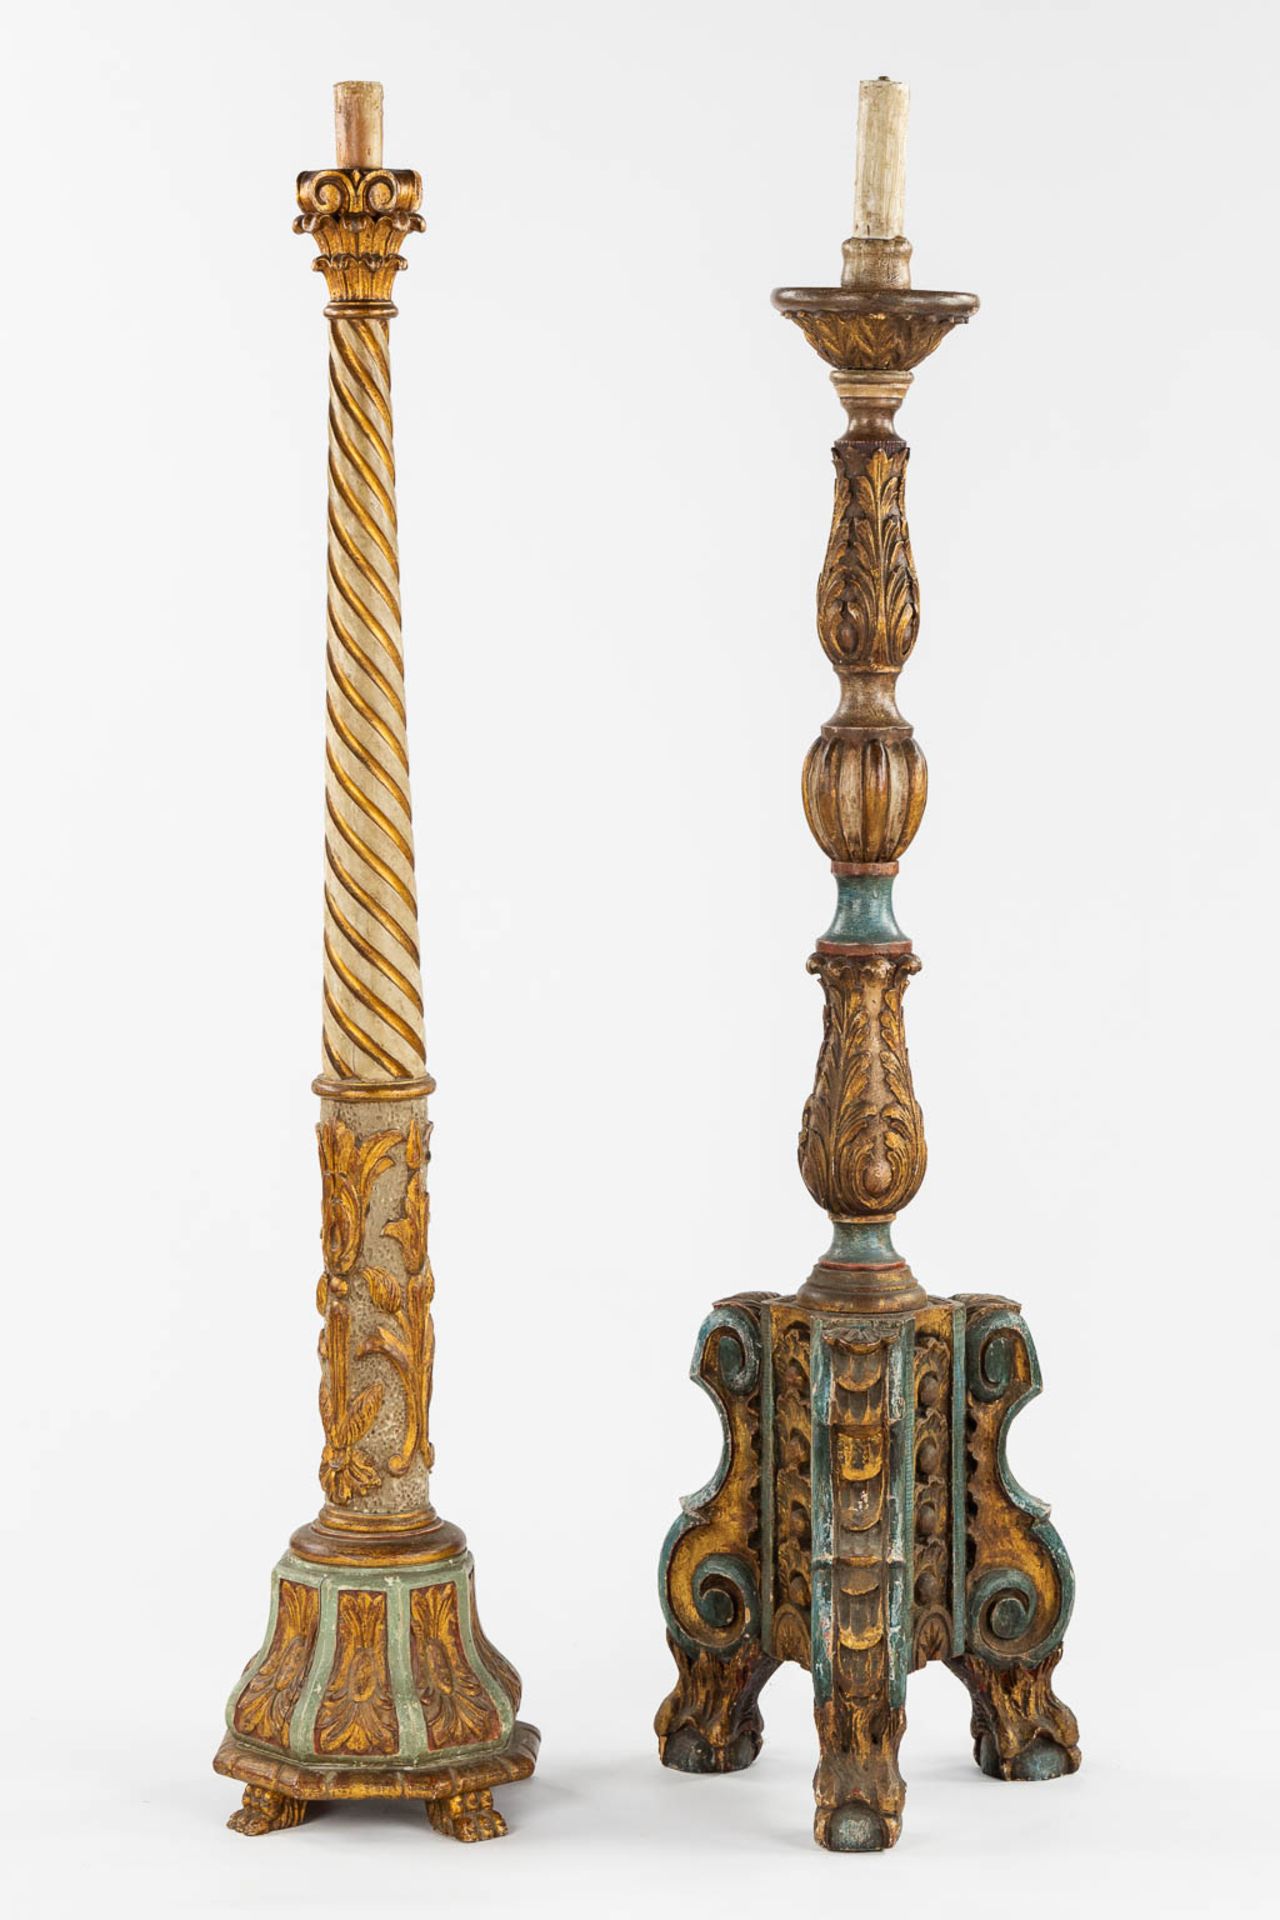 A pair of standing lamps, sculptured and patinated wood. Circa 1900. (H:144 cm) - Bild 5 aus 10